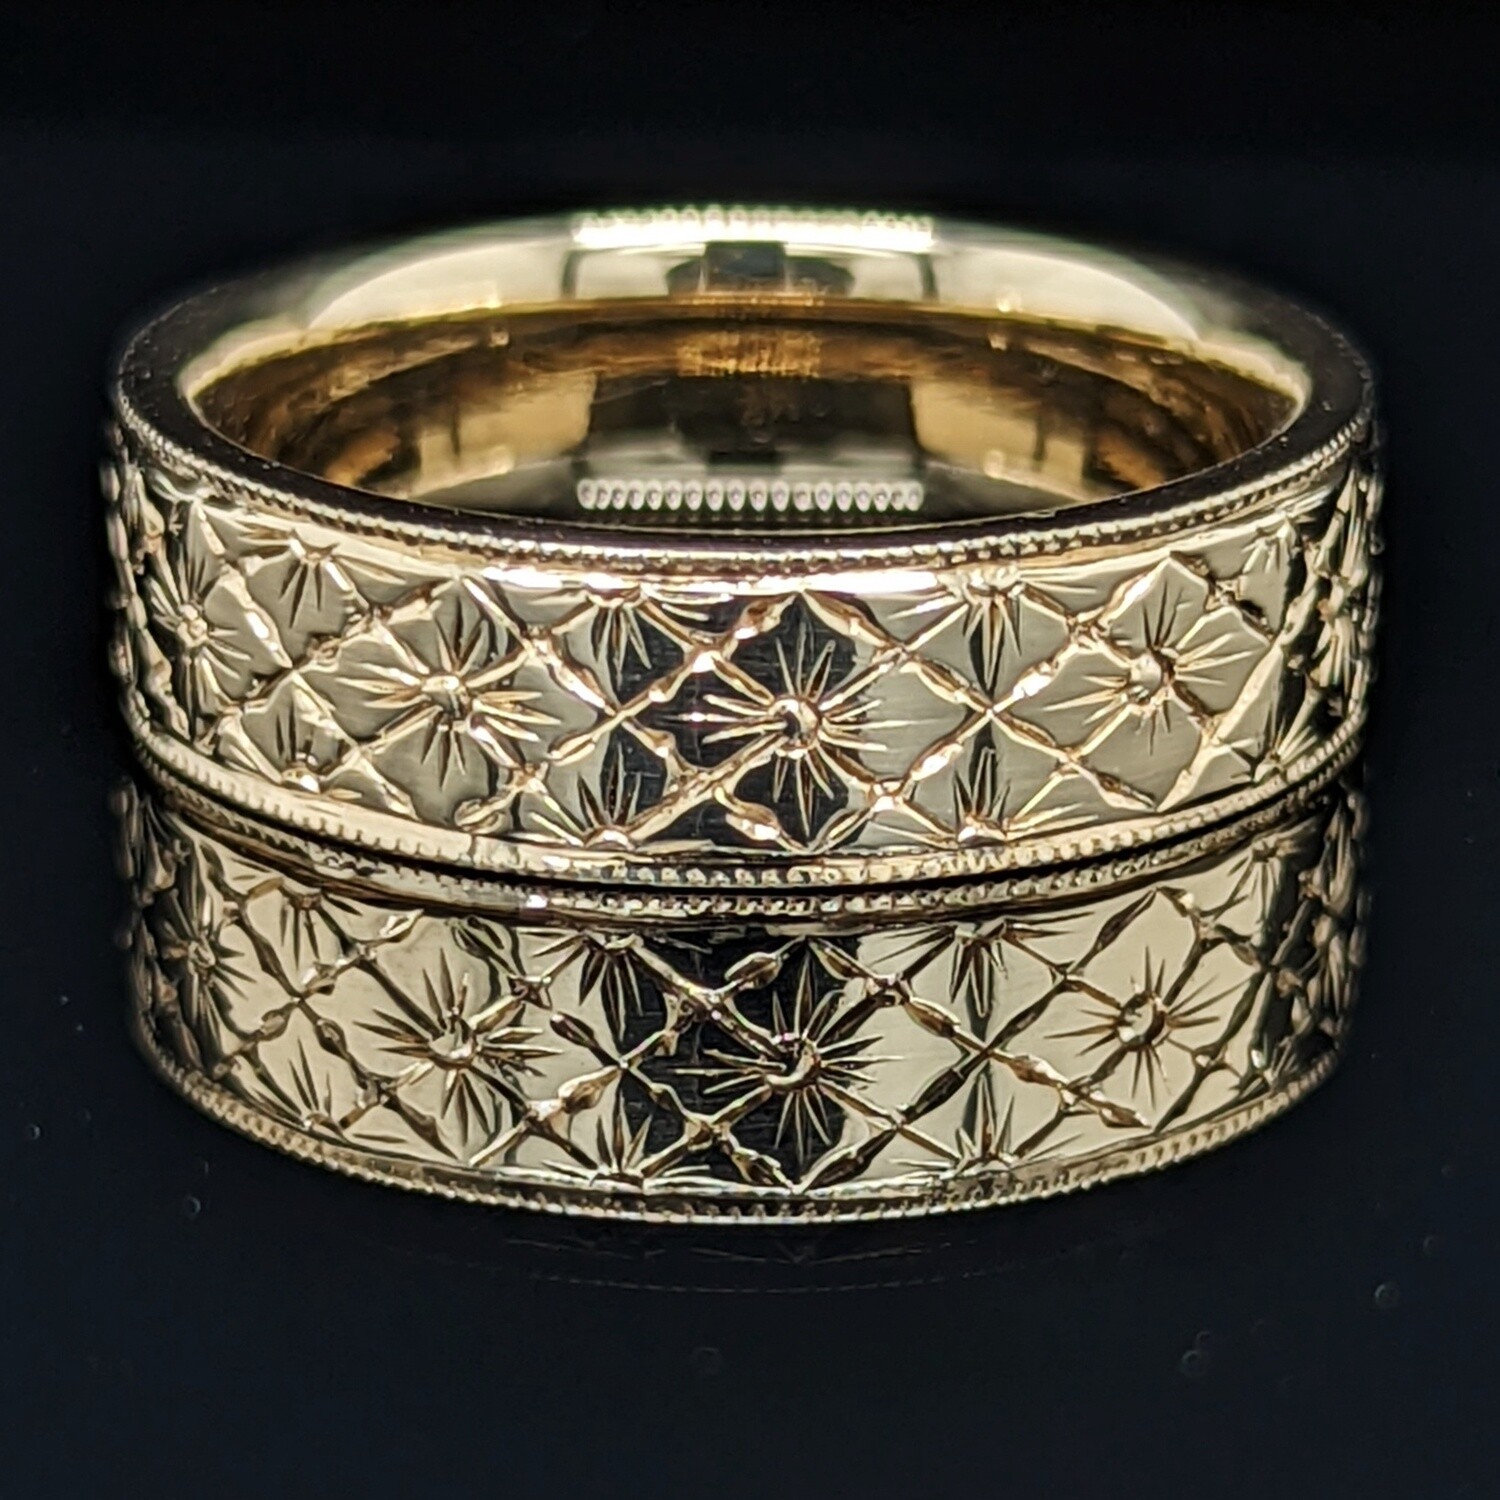 Tiled Band, Hand engraved